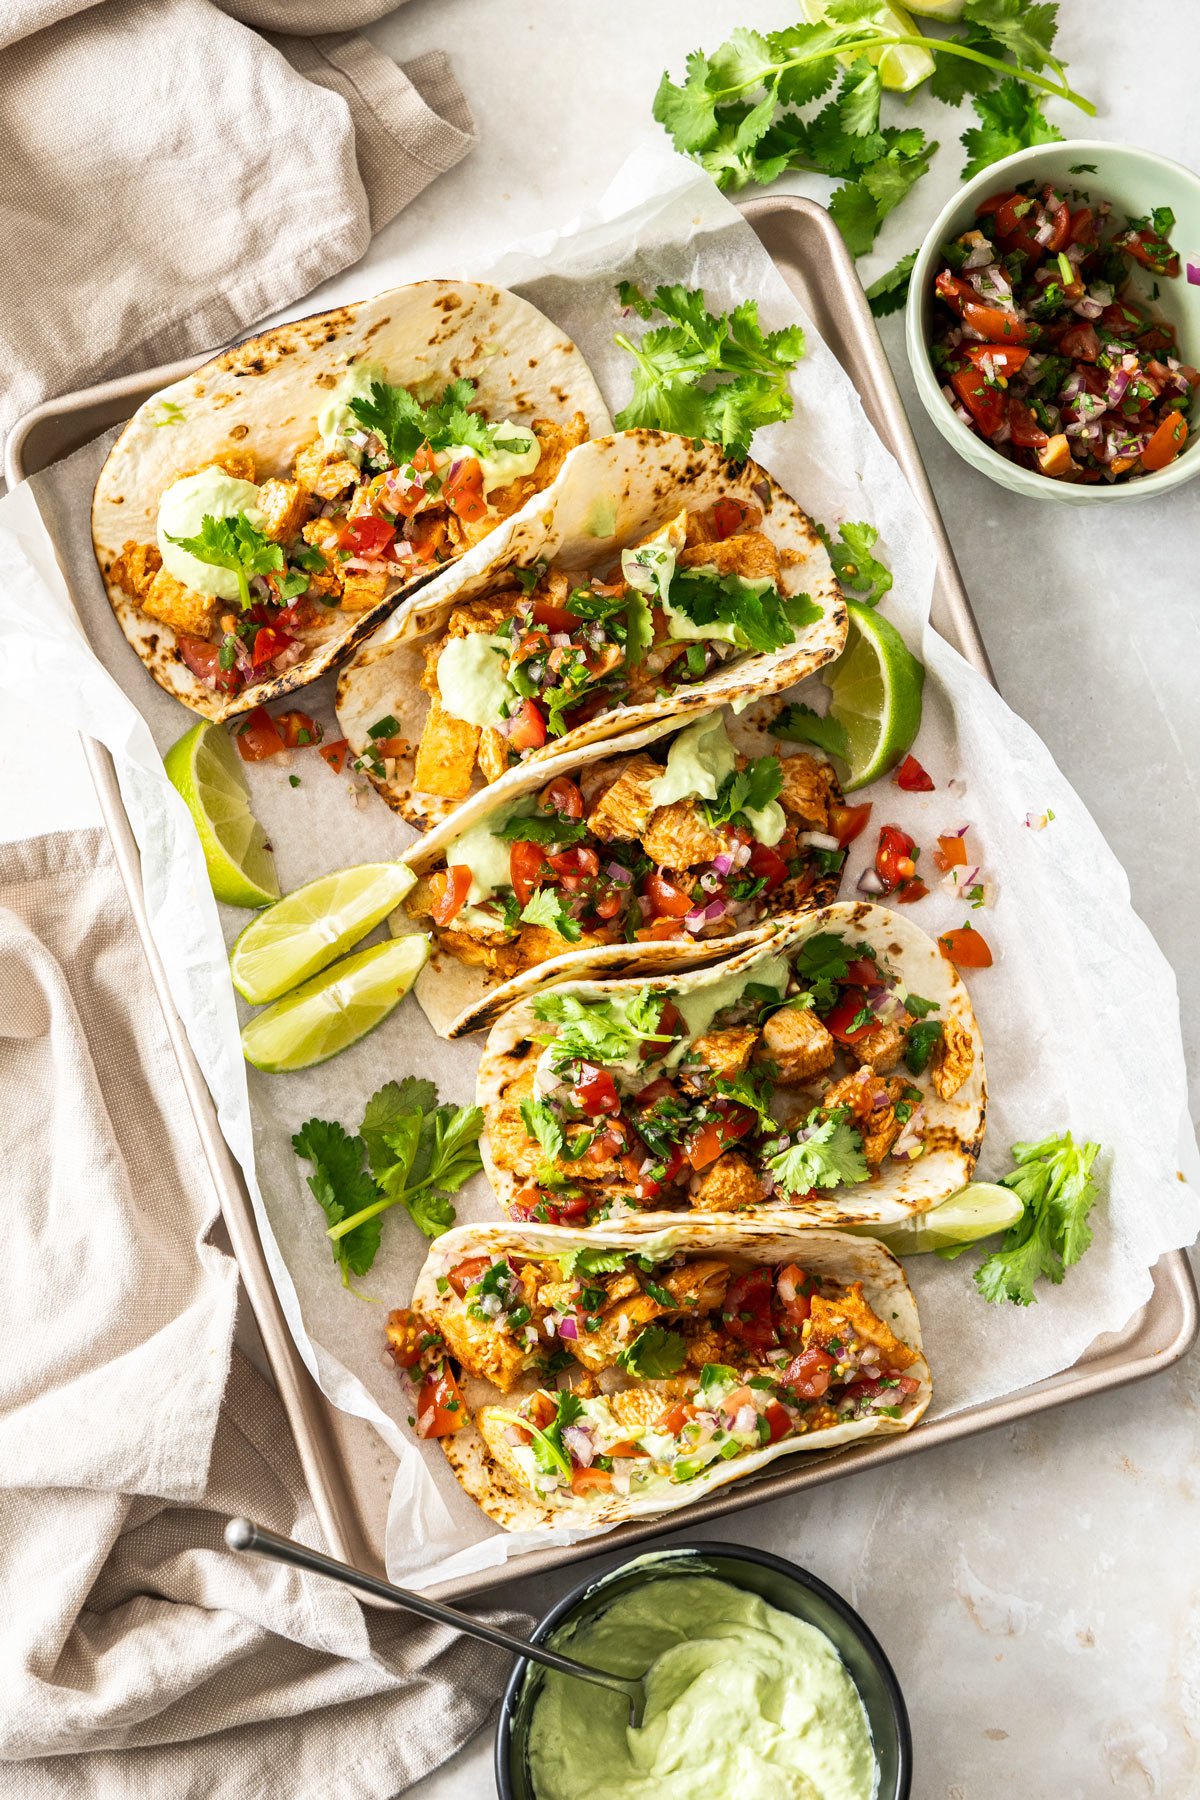 chicken tacos arranged on a metal tray. They are topped with salsa and herbs.